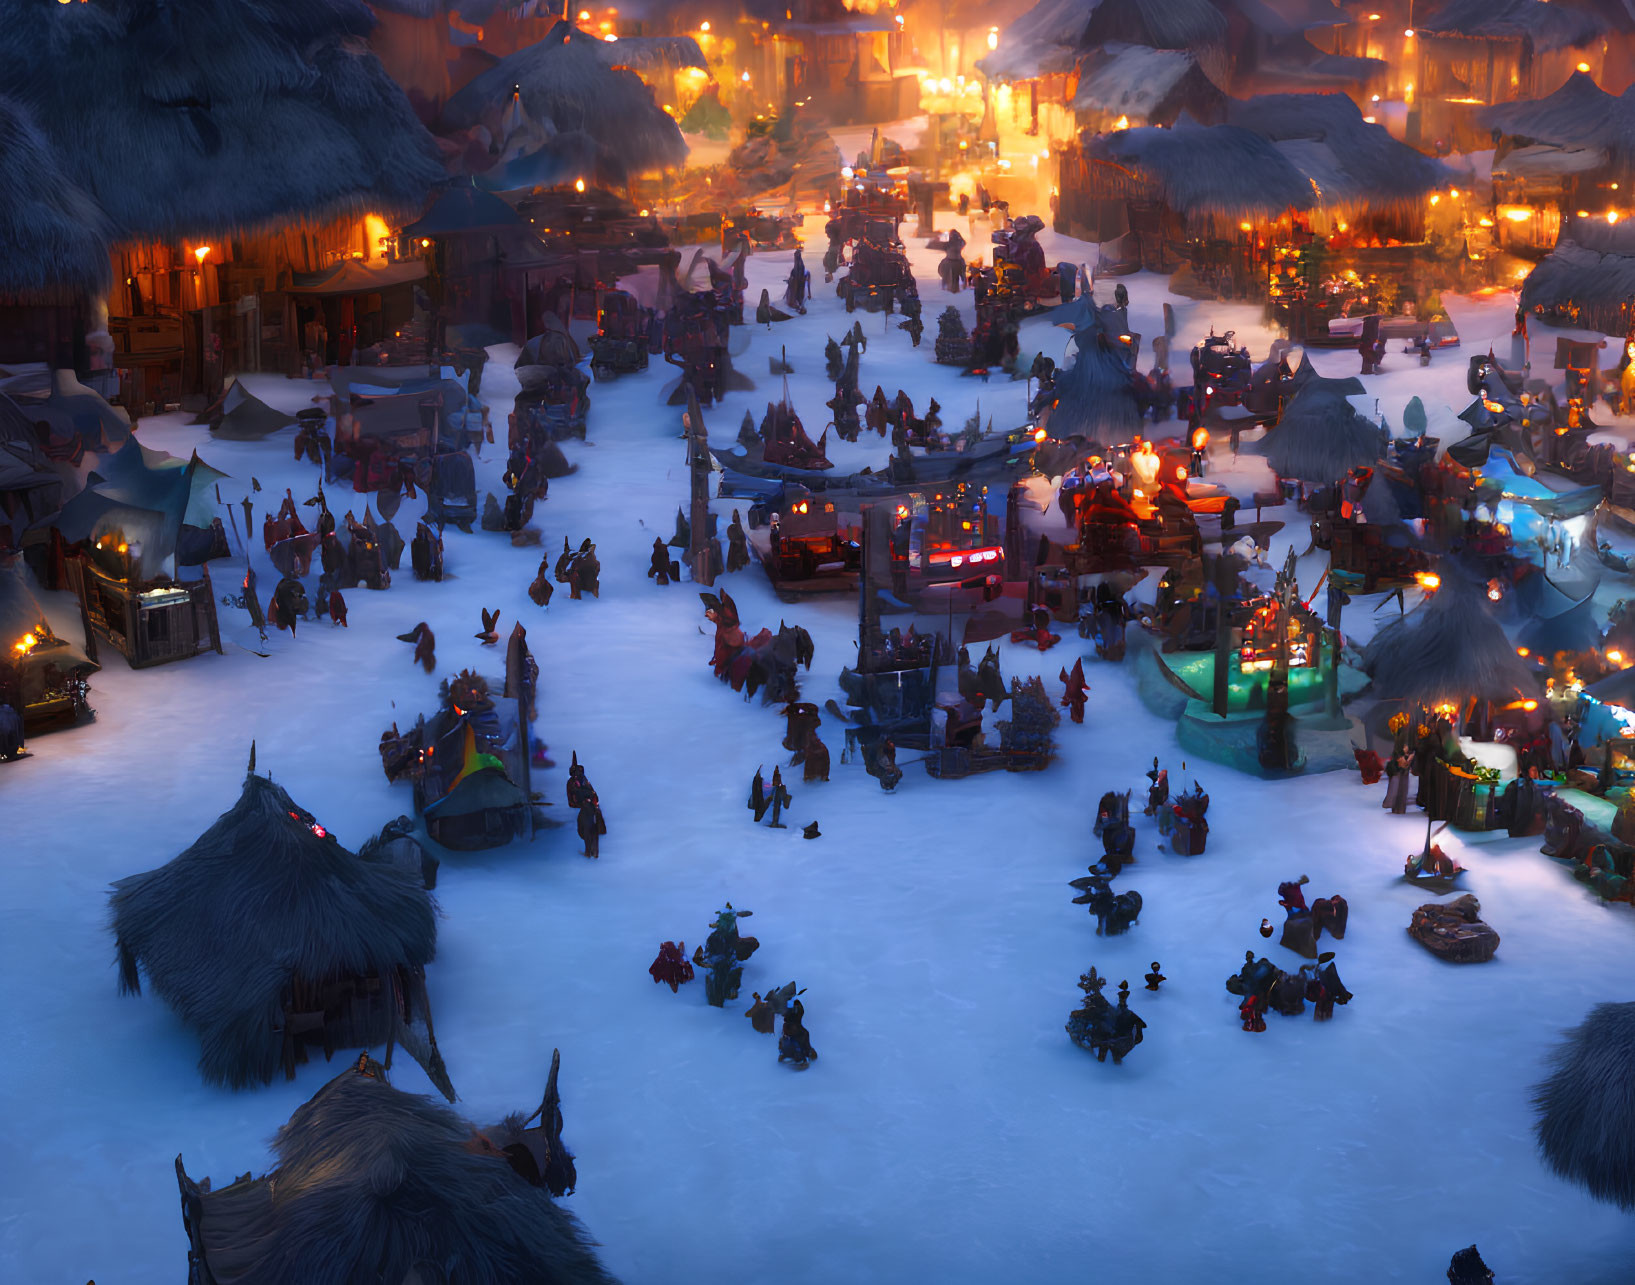 Medieval village at night covered in snow with warm lights and villagers.